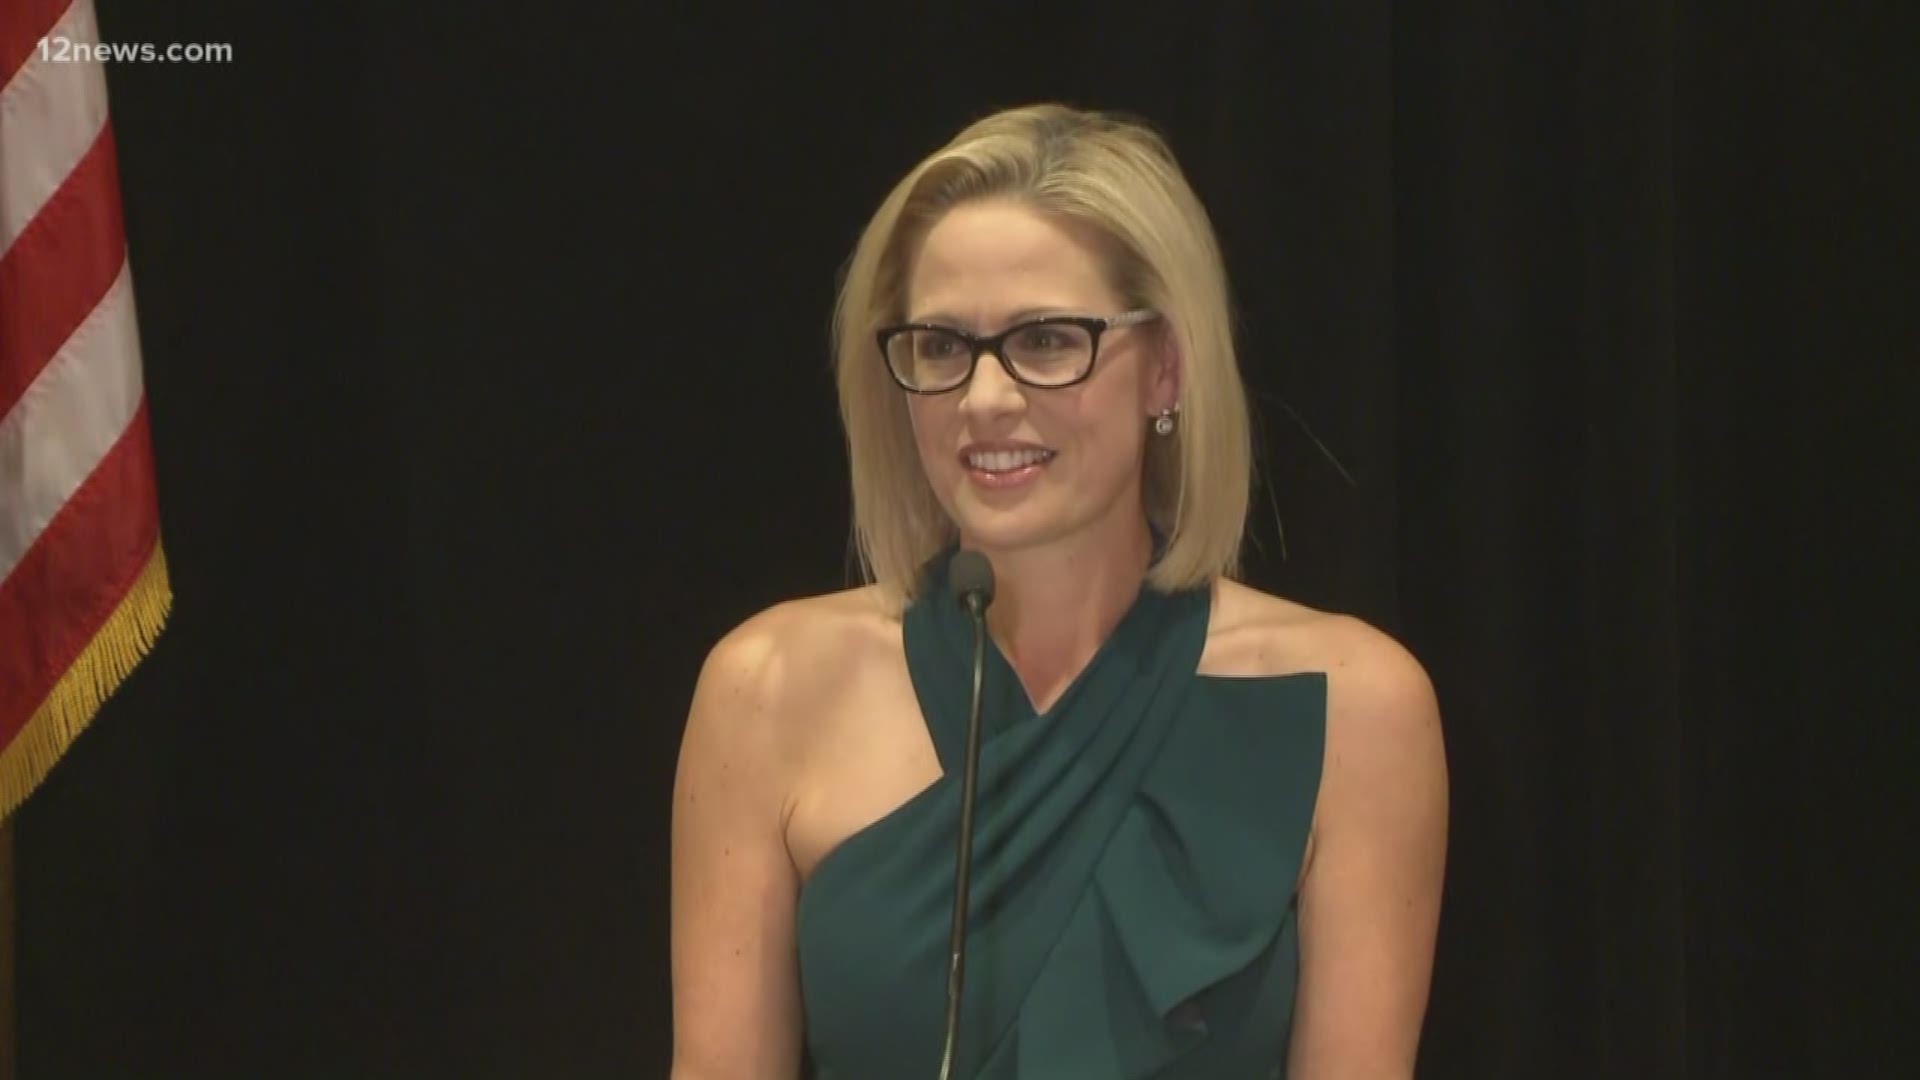 In the race to become the first woman elected to the U.S. Senate in Arizona Democrat Kyrsten Sinema has been declared the winner over Republican Martha McSally. Watch her accept her new position.